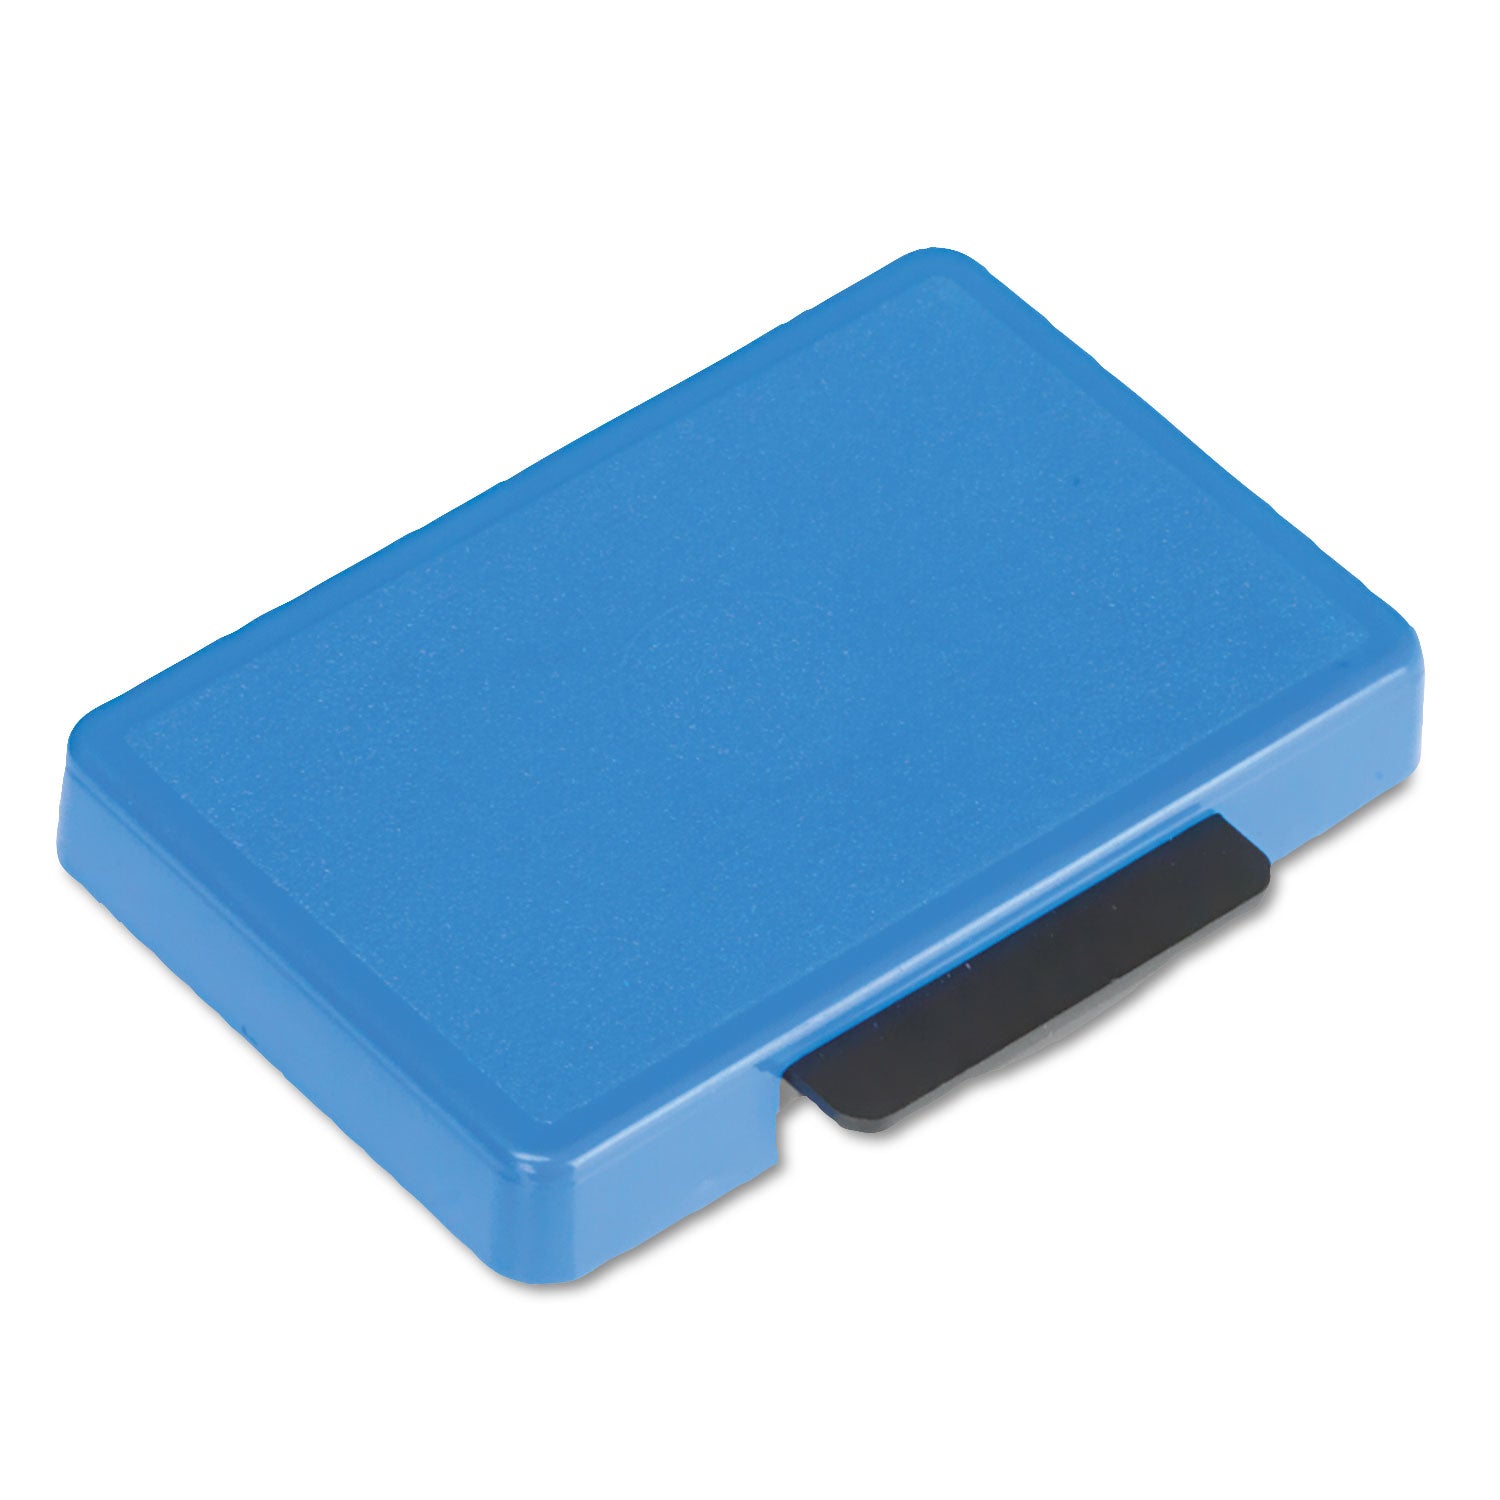 T5440 Professional Replacement Ink Pad for Trodat Custom Self-Inking Stamps, 1.13" x 2", Blue - 